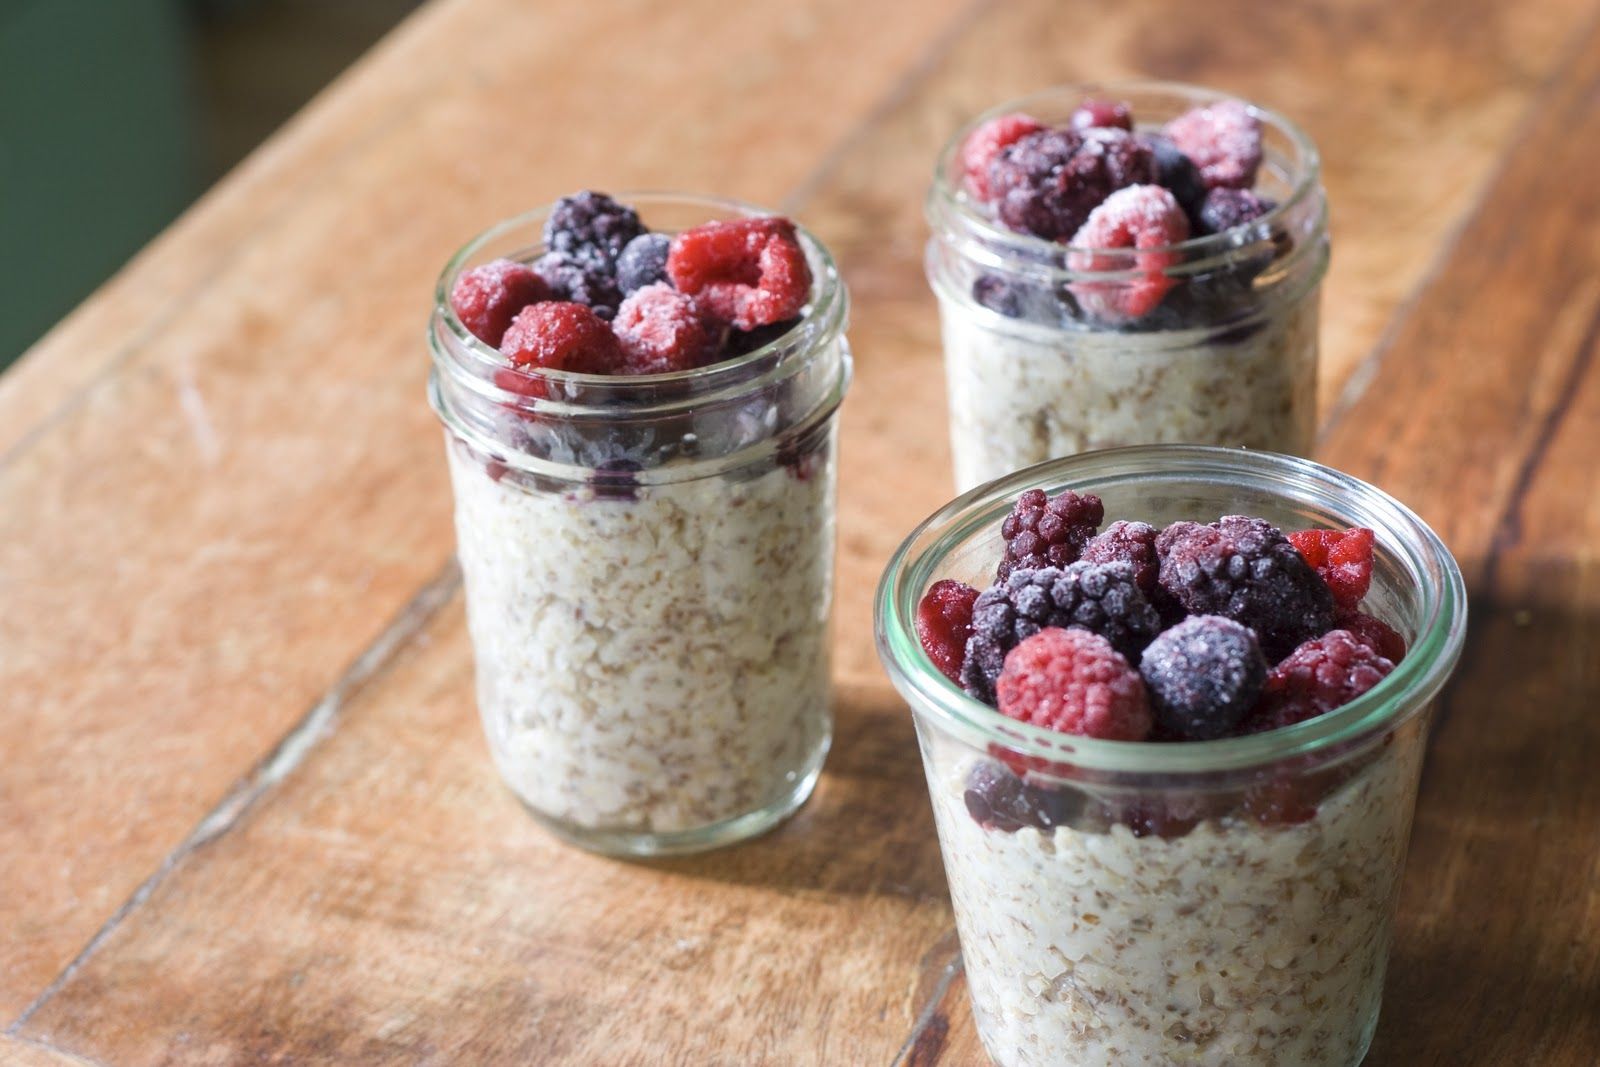 Steel Cut Oats in a Jar with Berries and Flax Seeds